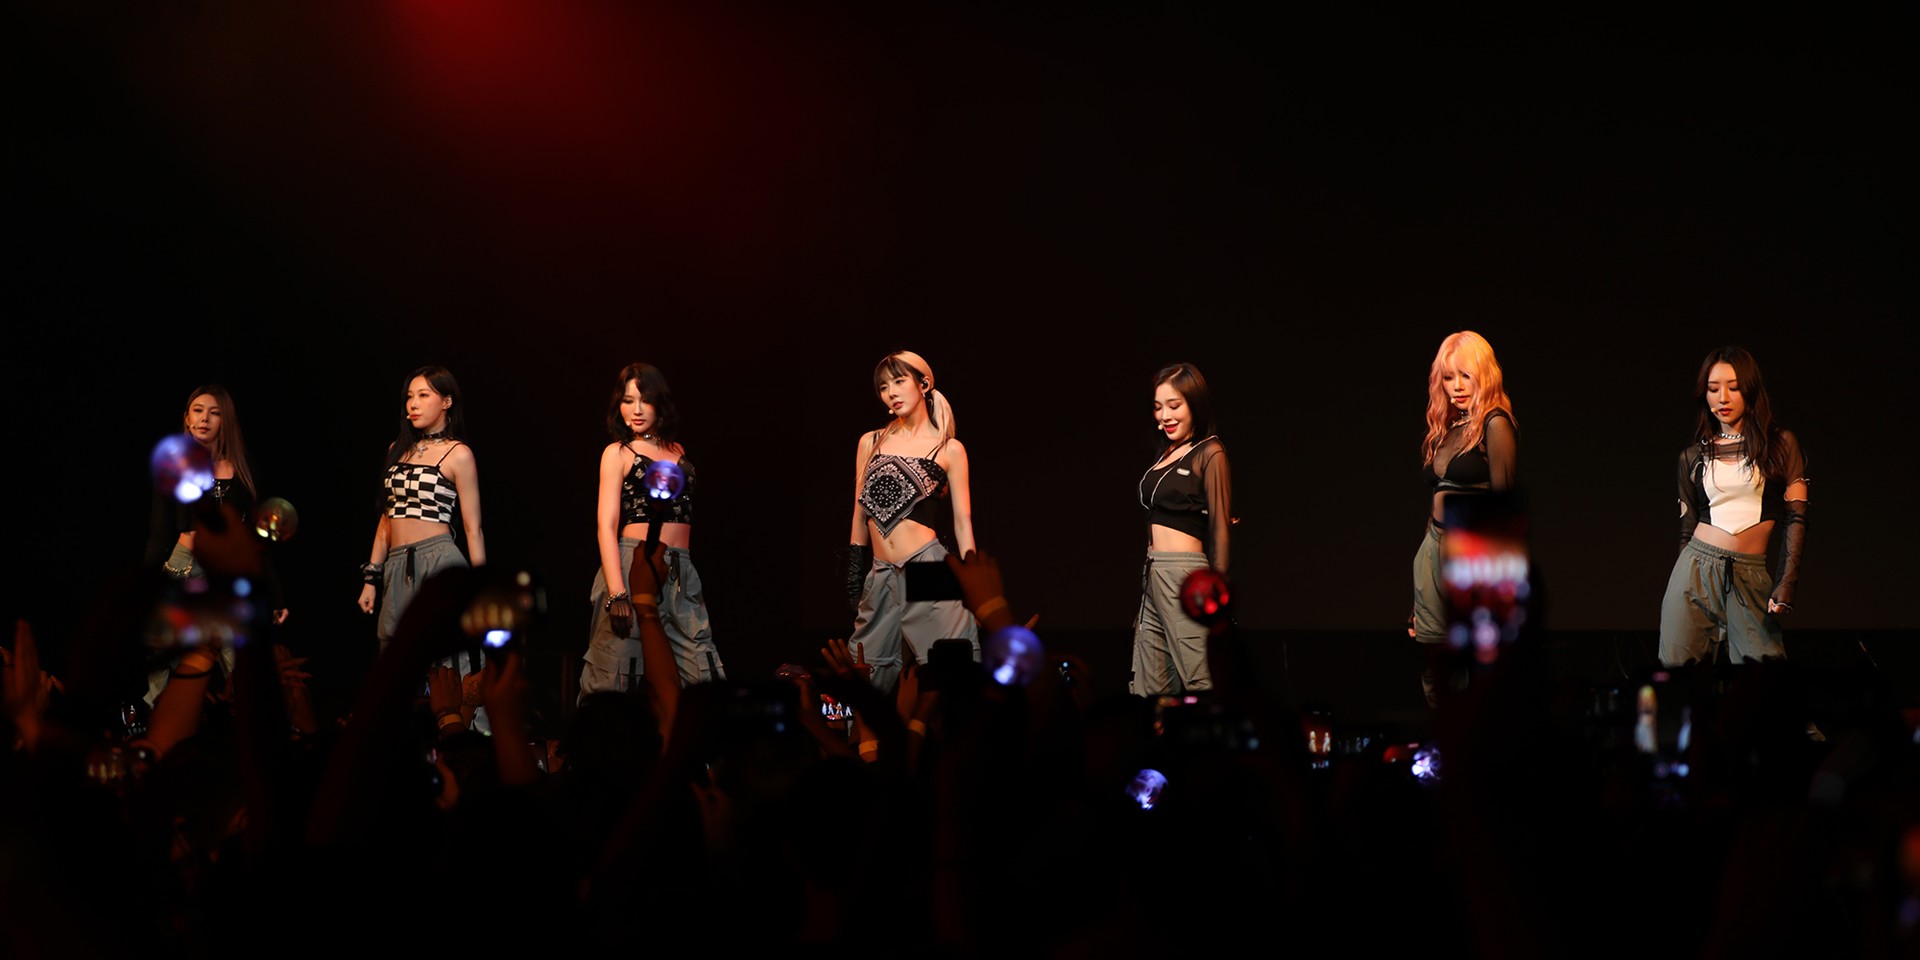 Dreamcatcher kick off US tour with soldout show in New York